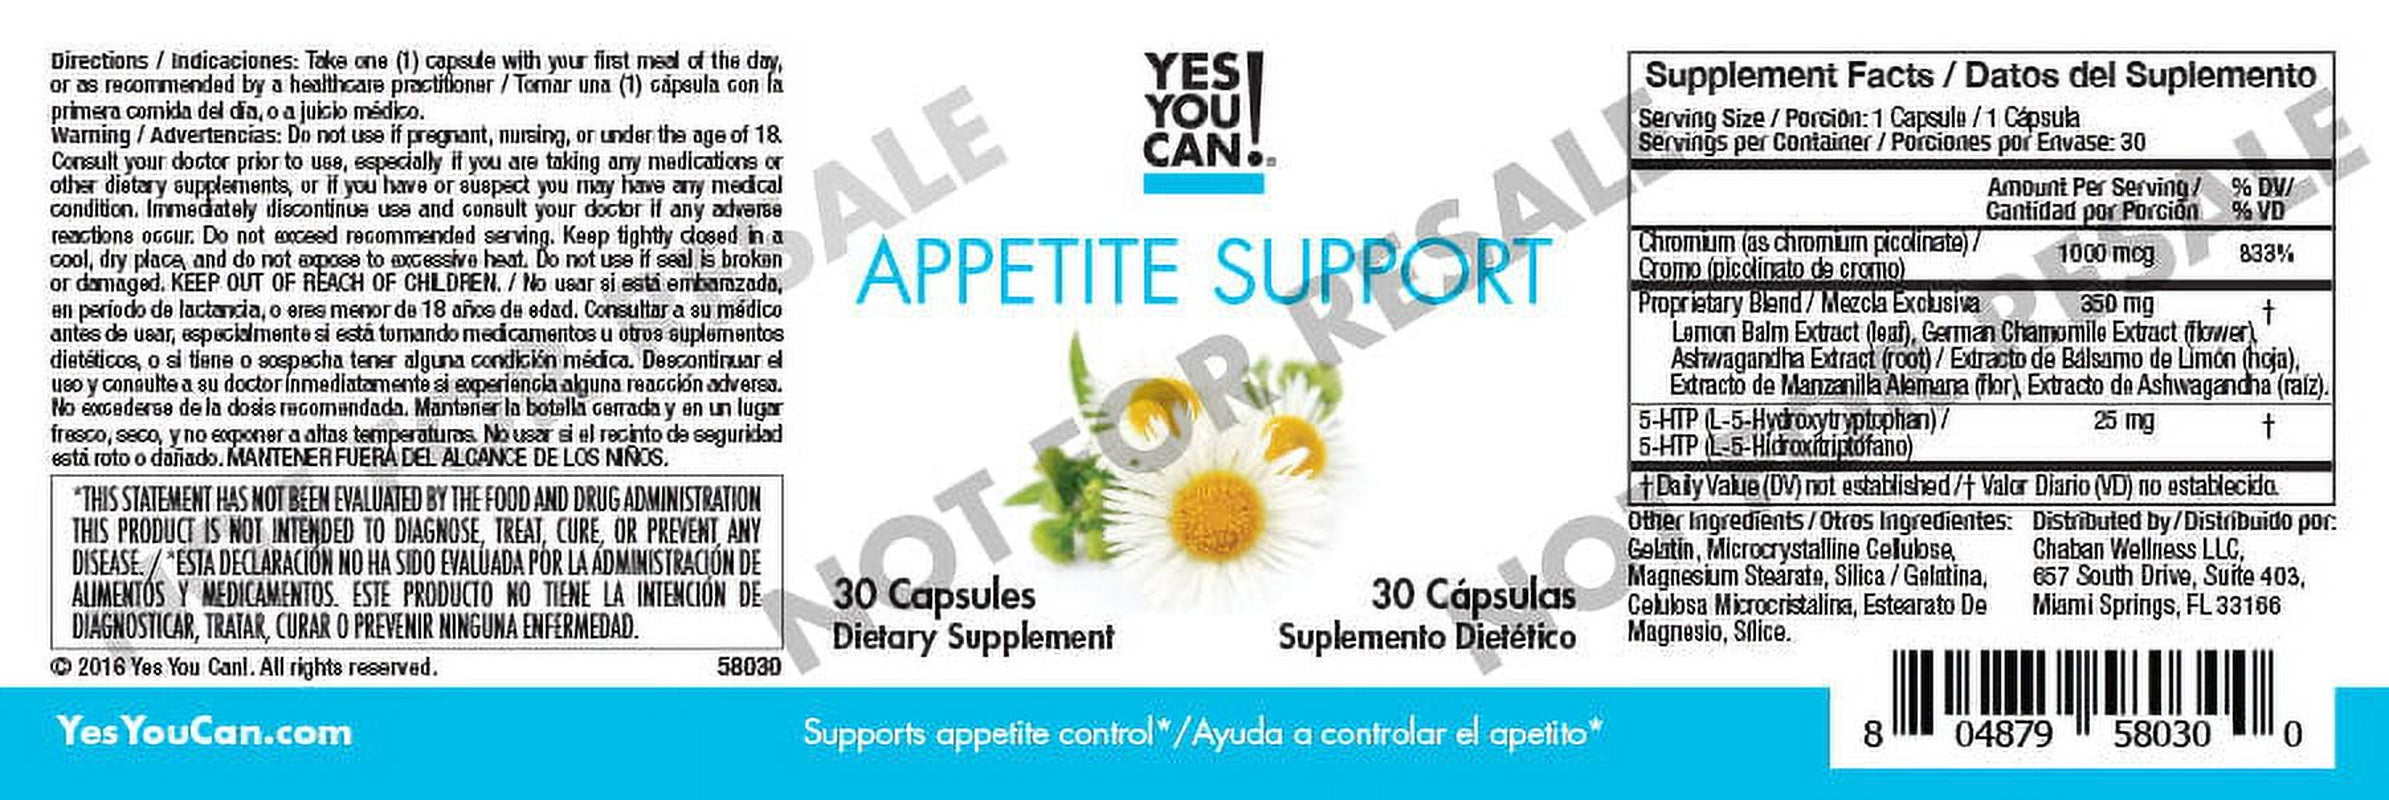 Yes You Can! Weight Loss Diet Supplement Kit Made with High-Quality Ingredients - Bundle Includes: (One Slim Down, One Appetite Support, One Collagen, One Colon Optimizer) - 30 Servings